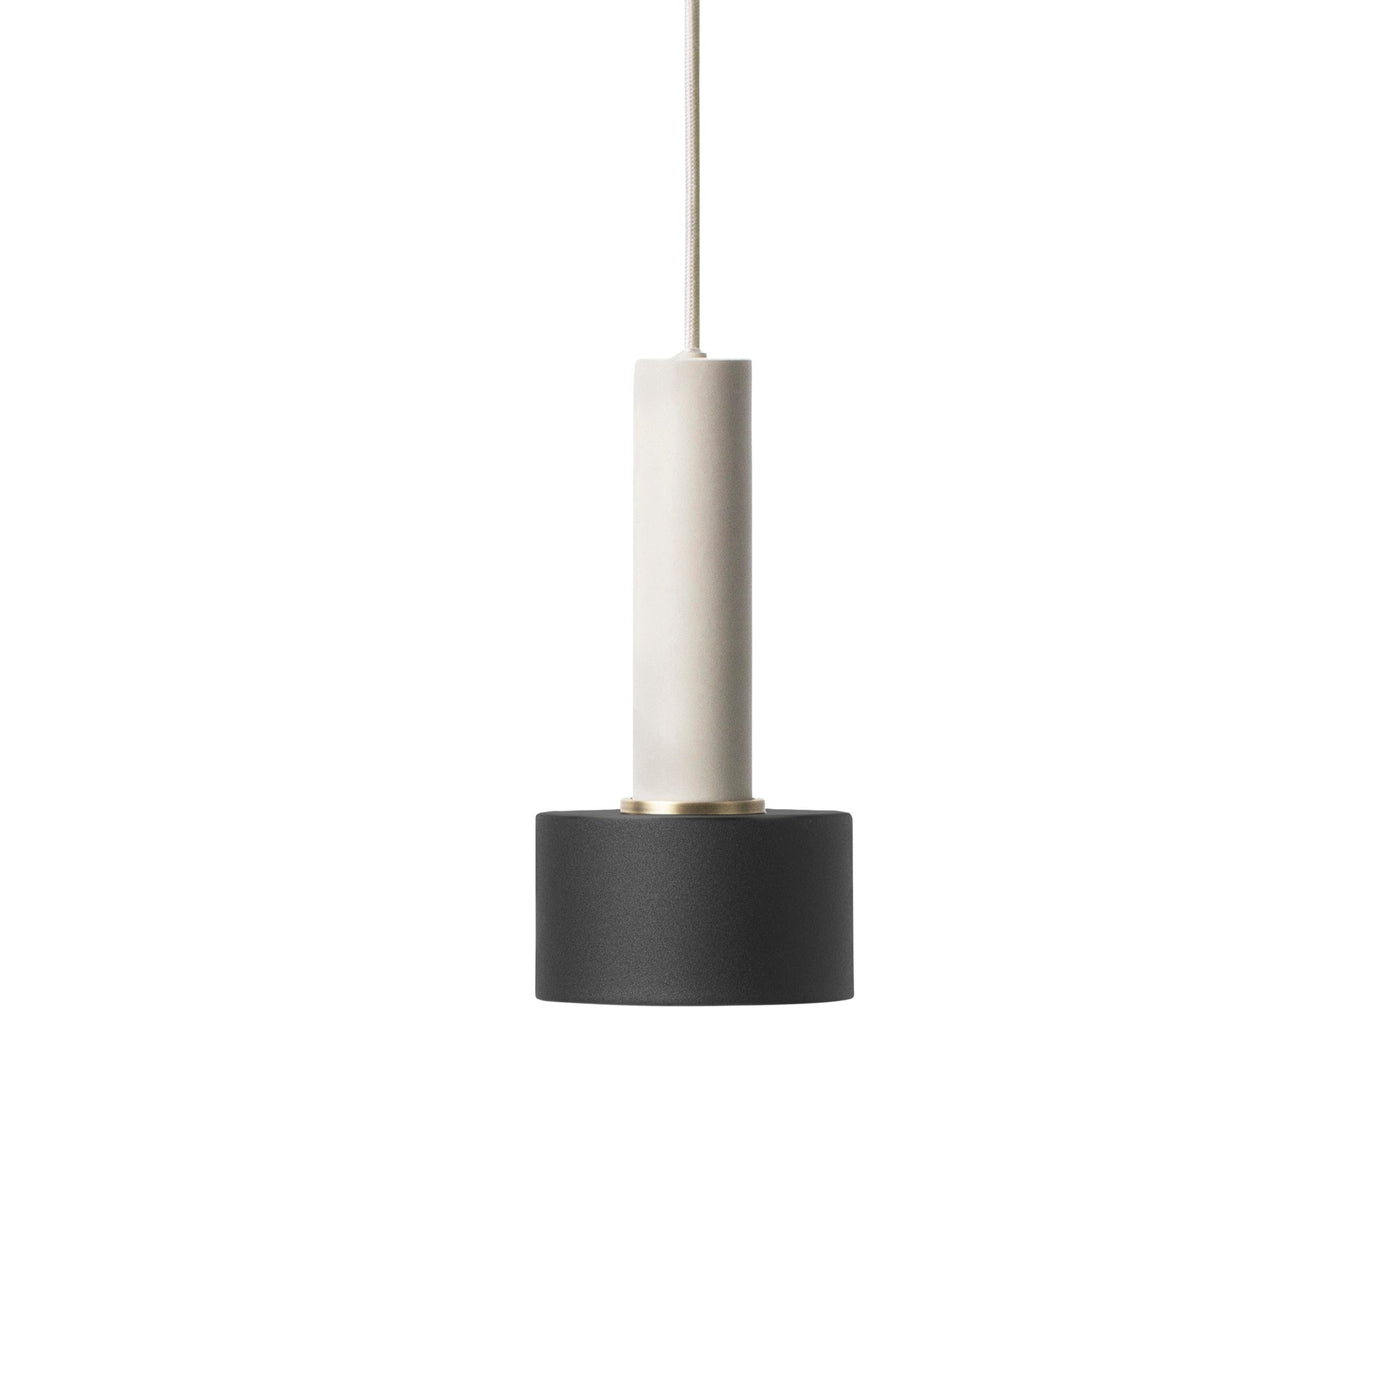 ferm LIVING Collect Lighting Disc Shade. Shop online at someday designs. #colour_black